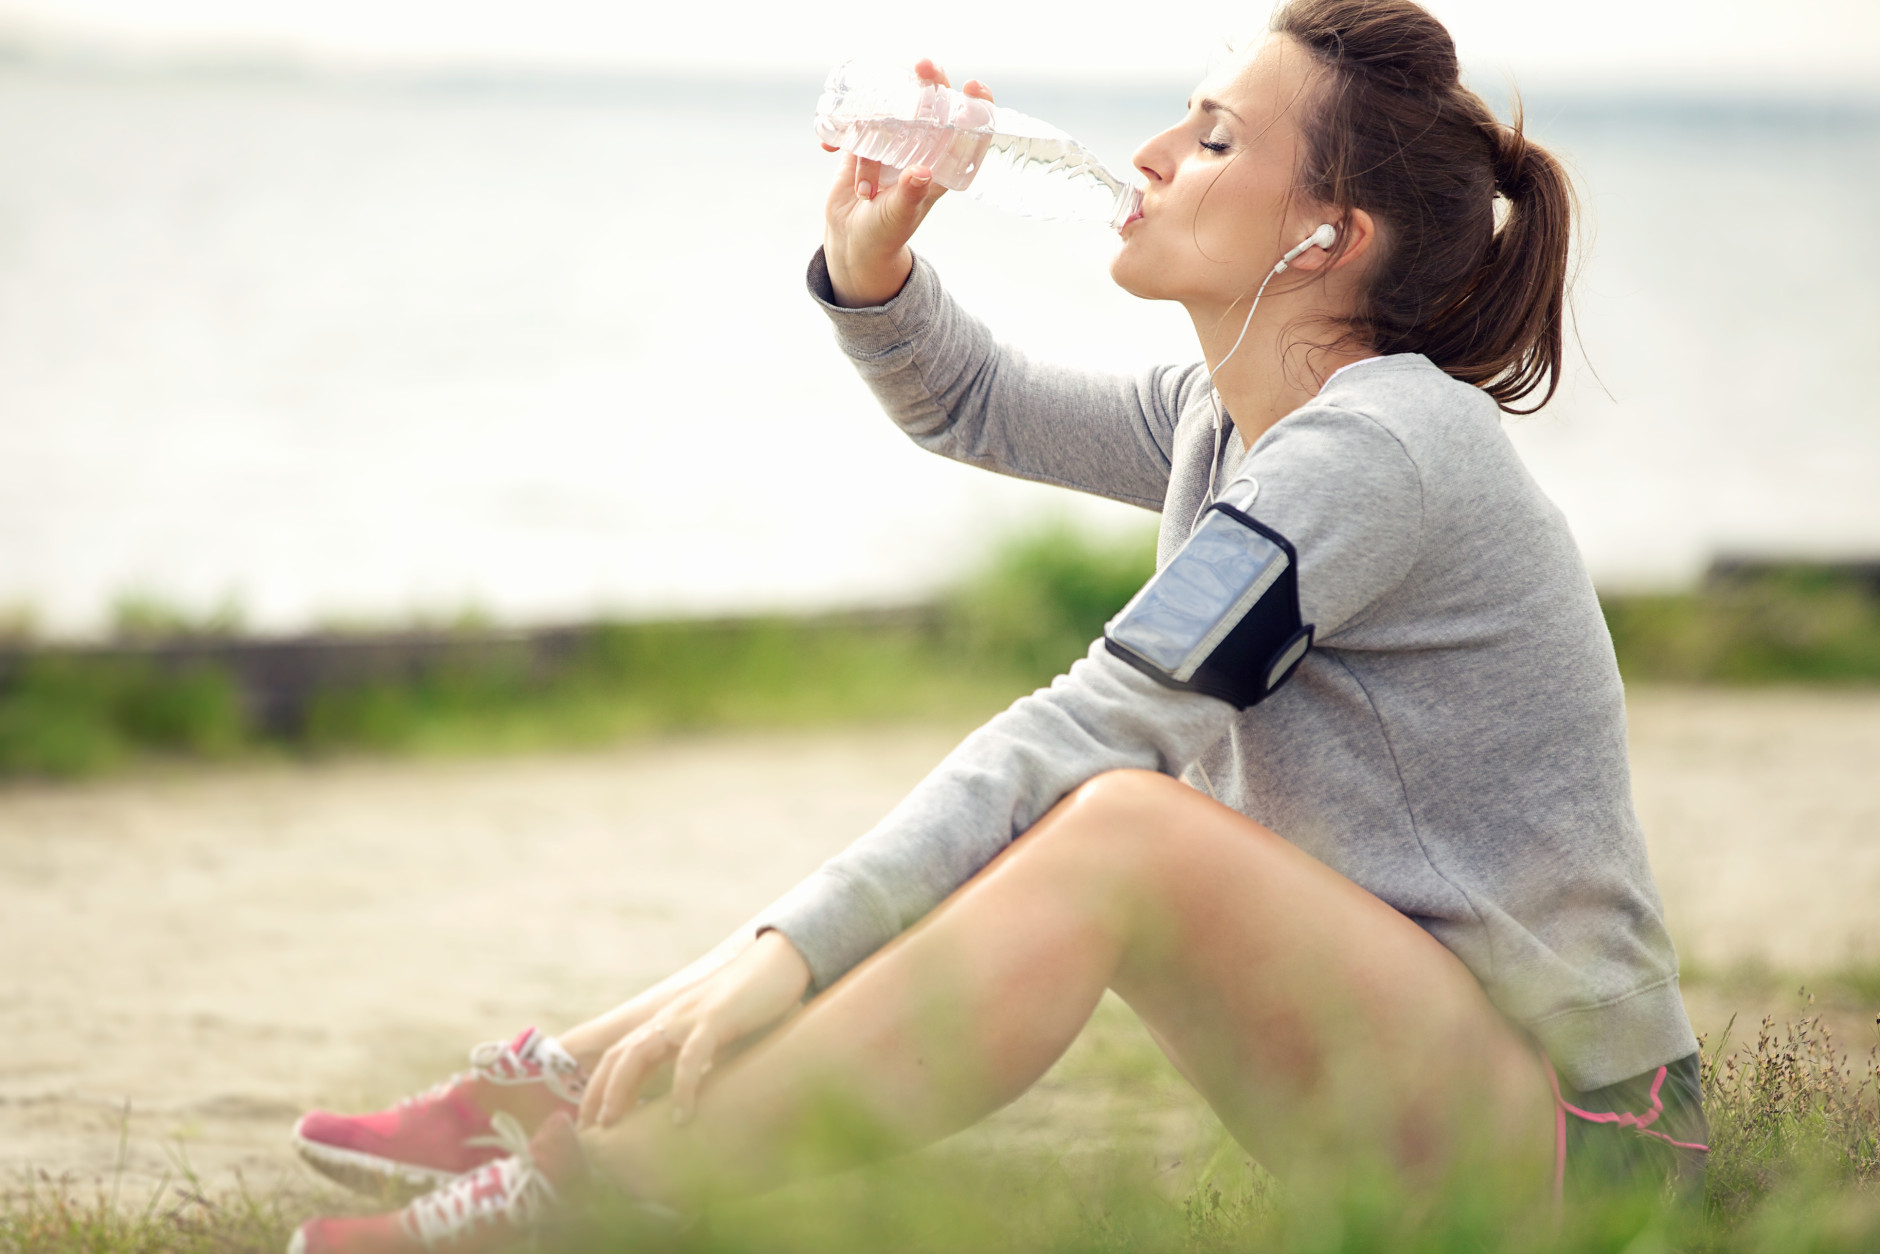 Tired female jogger sitting on the grass and drinking bottled water